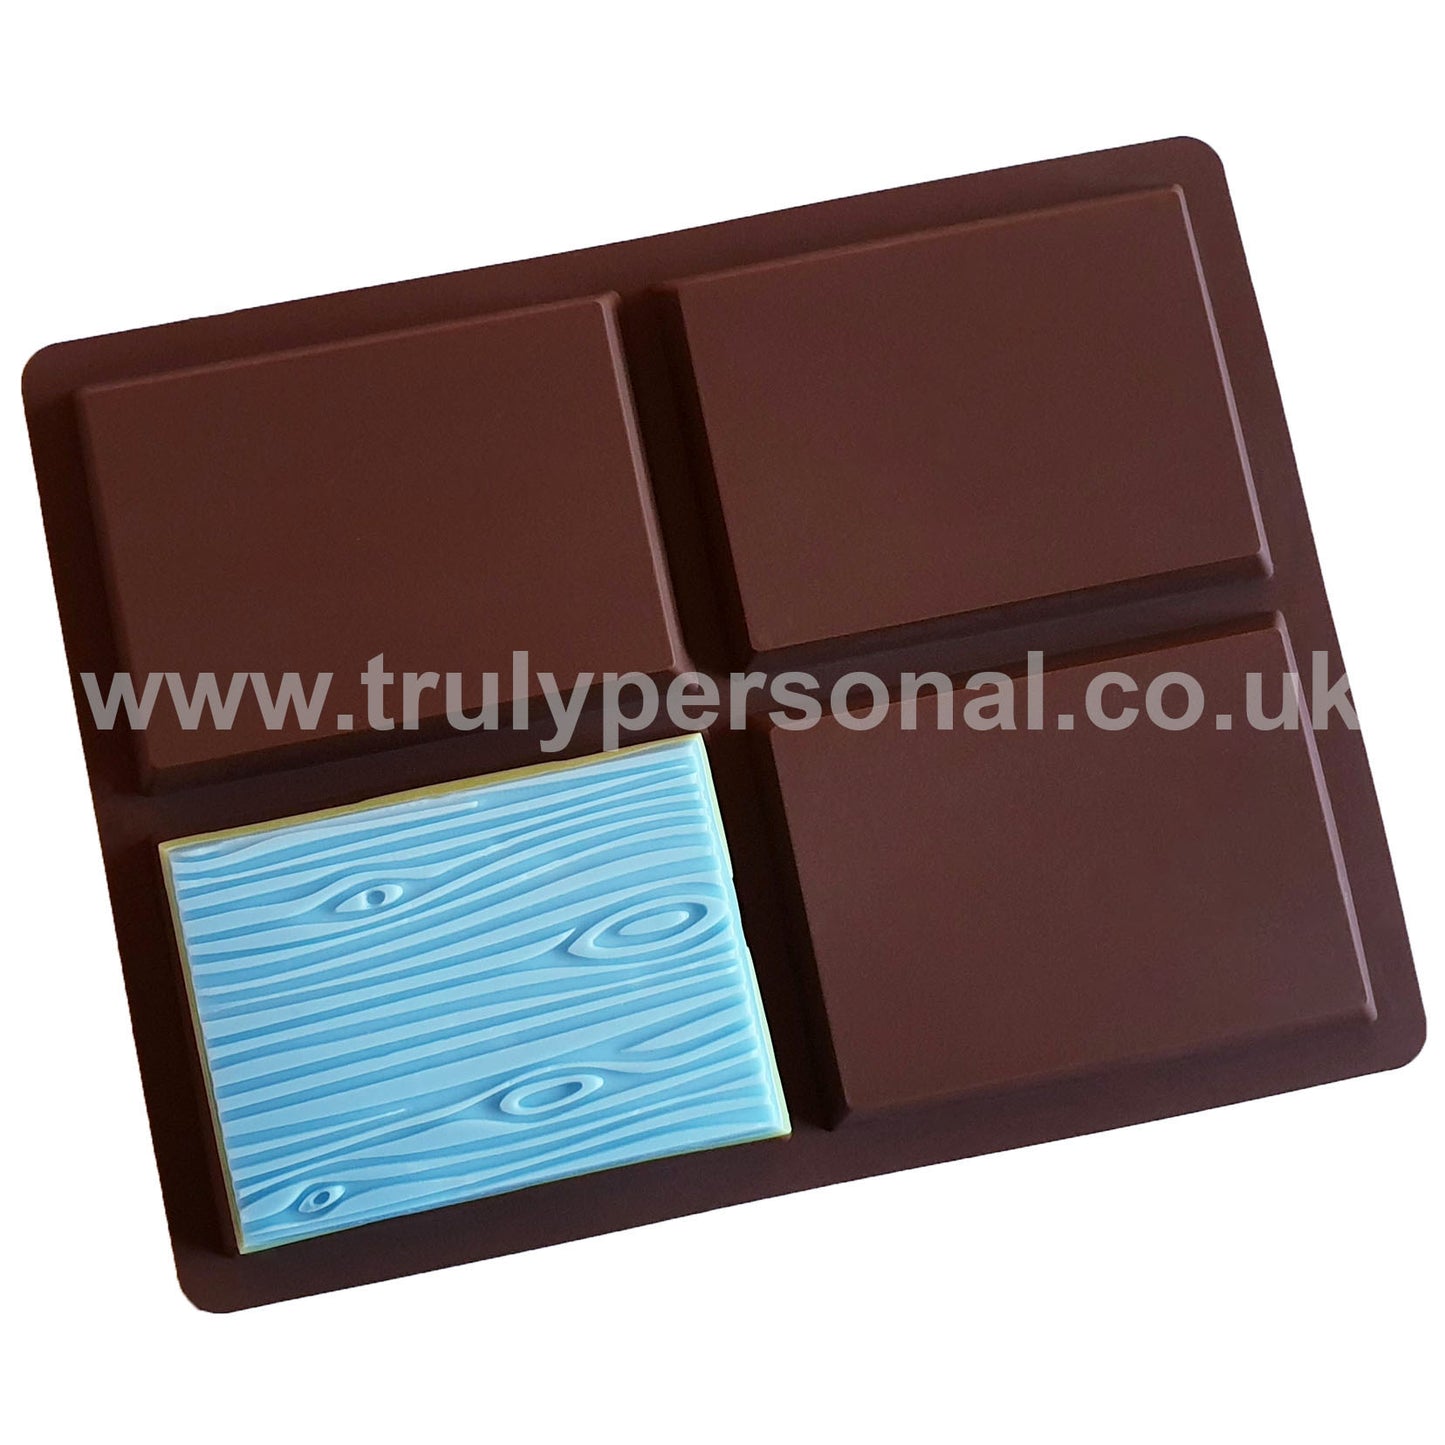 Wood Grain Bar Silicone Mould - 4 Cell | Wax Melts | Truly Personal Ltd